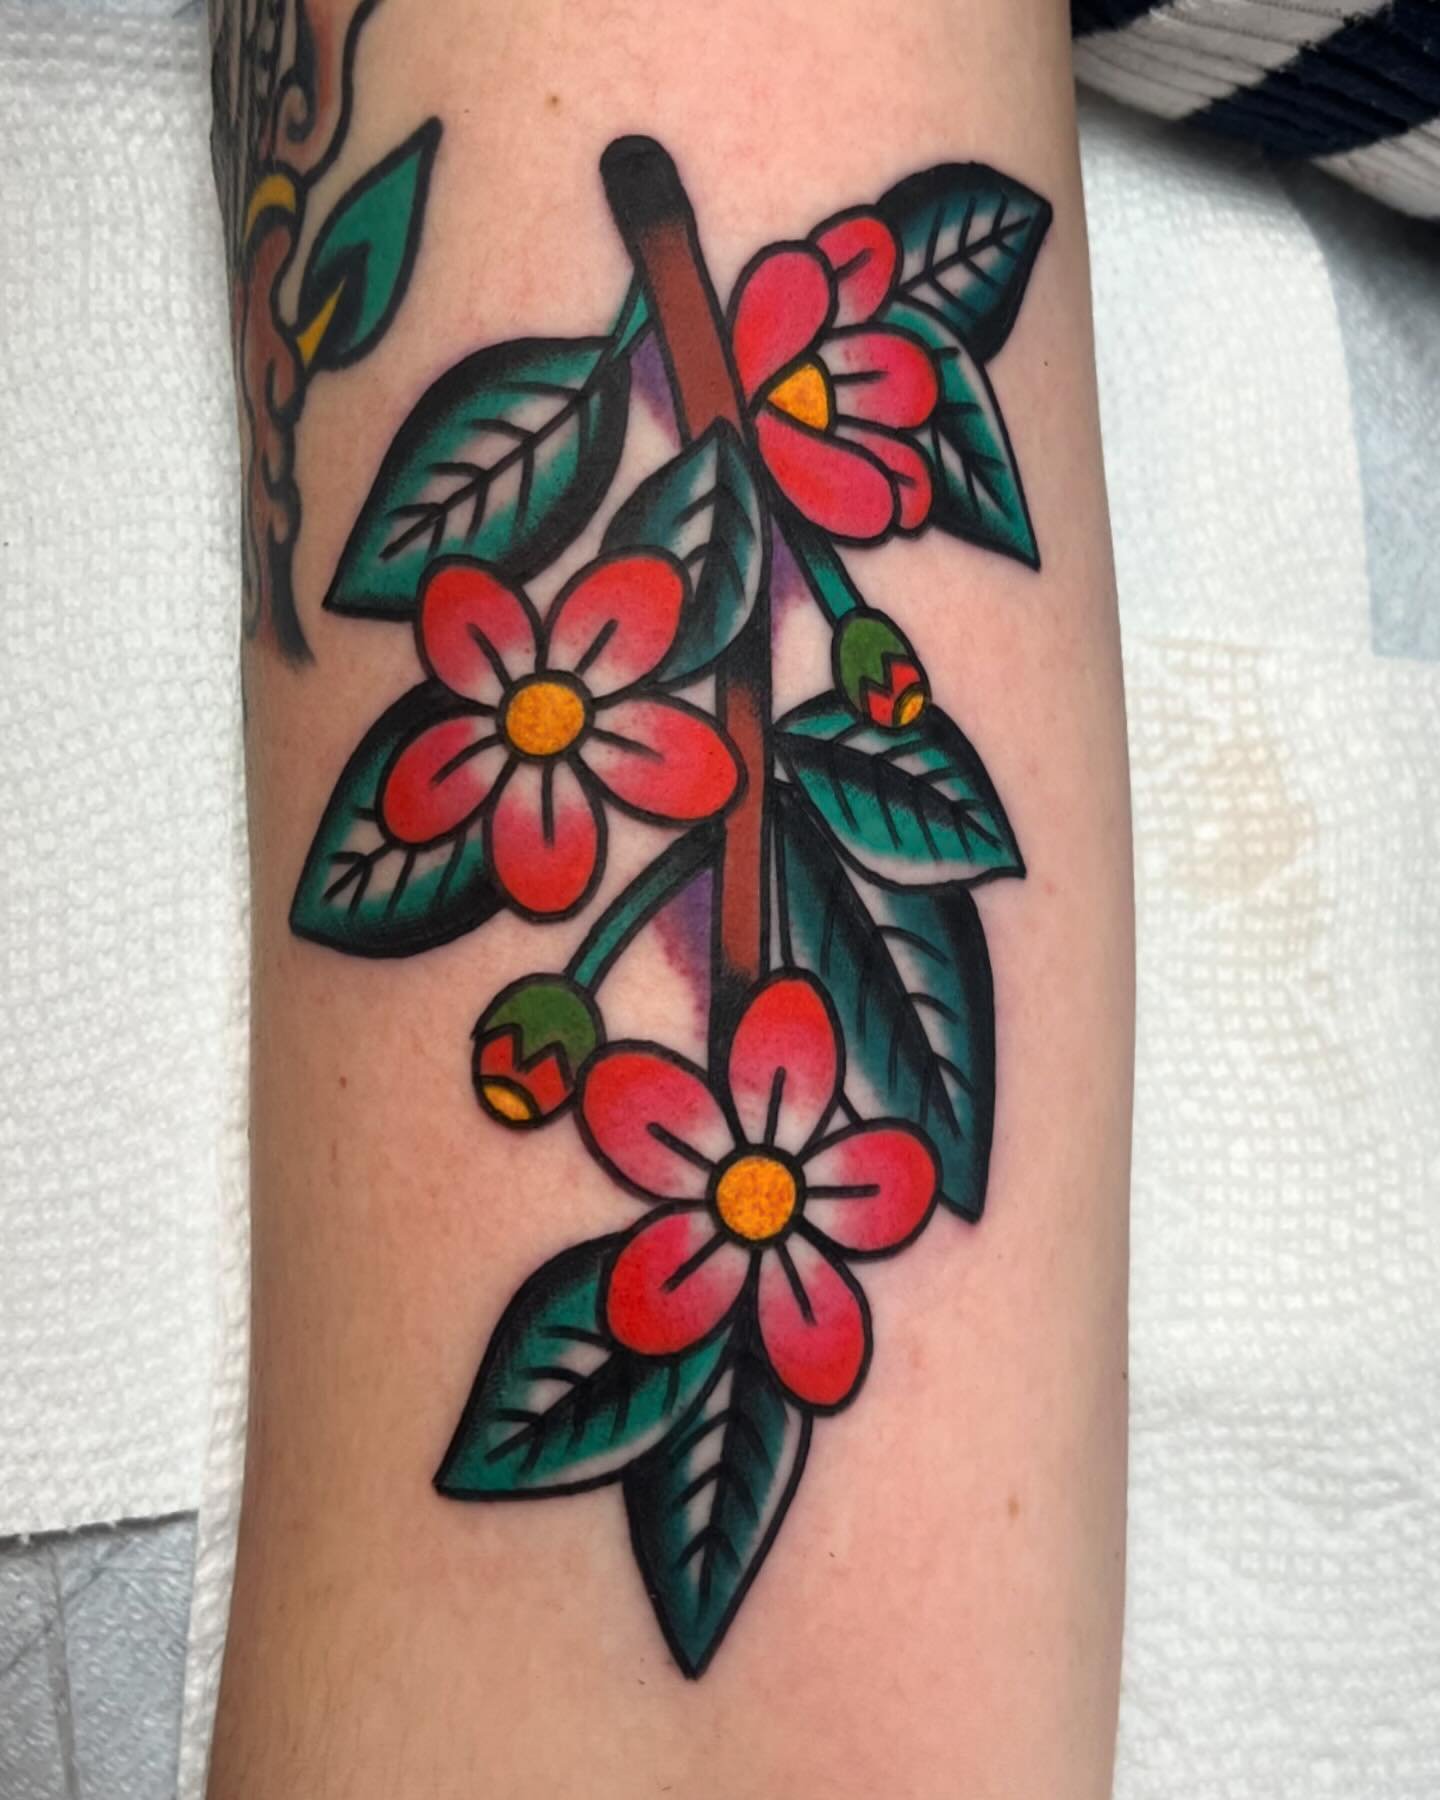 Done by @juliacampione 🌈🌈🌈
Link in her bio for booking 
#chicago #chicagotattooartist #chicagotattooshop #lakeview #logansquare #andersonville #wickerpark #ravenswood #chicagotattoos #chicagotattooartists #tattoo #midwesttattoo #midwesttattooer #l